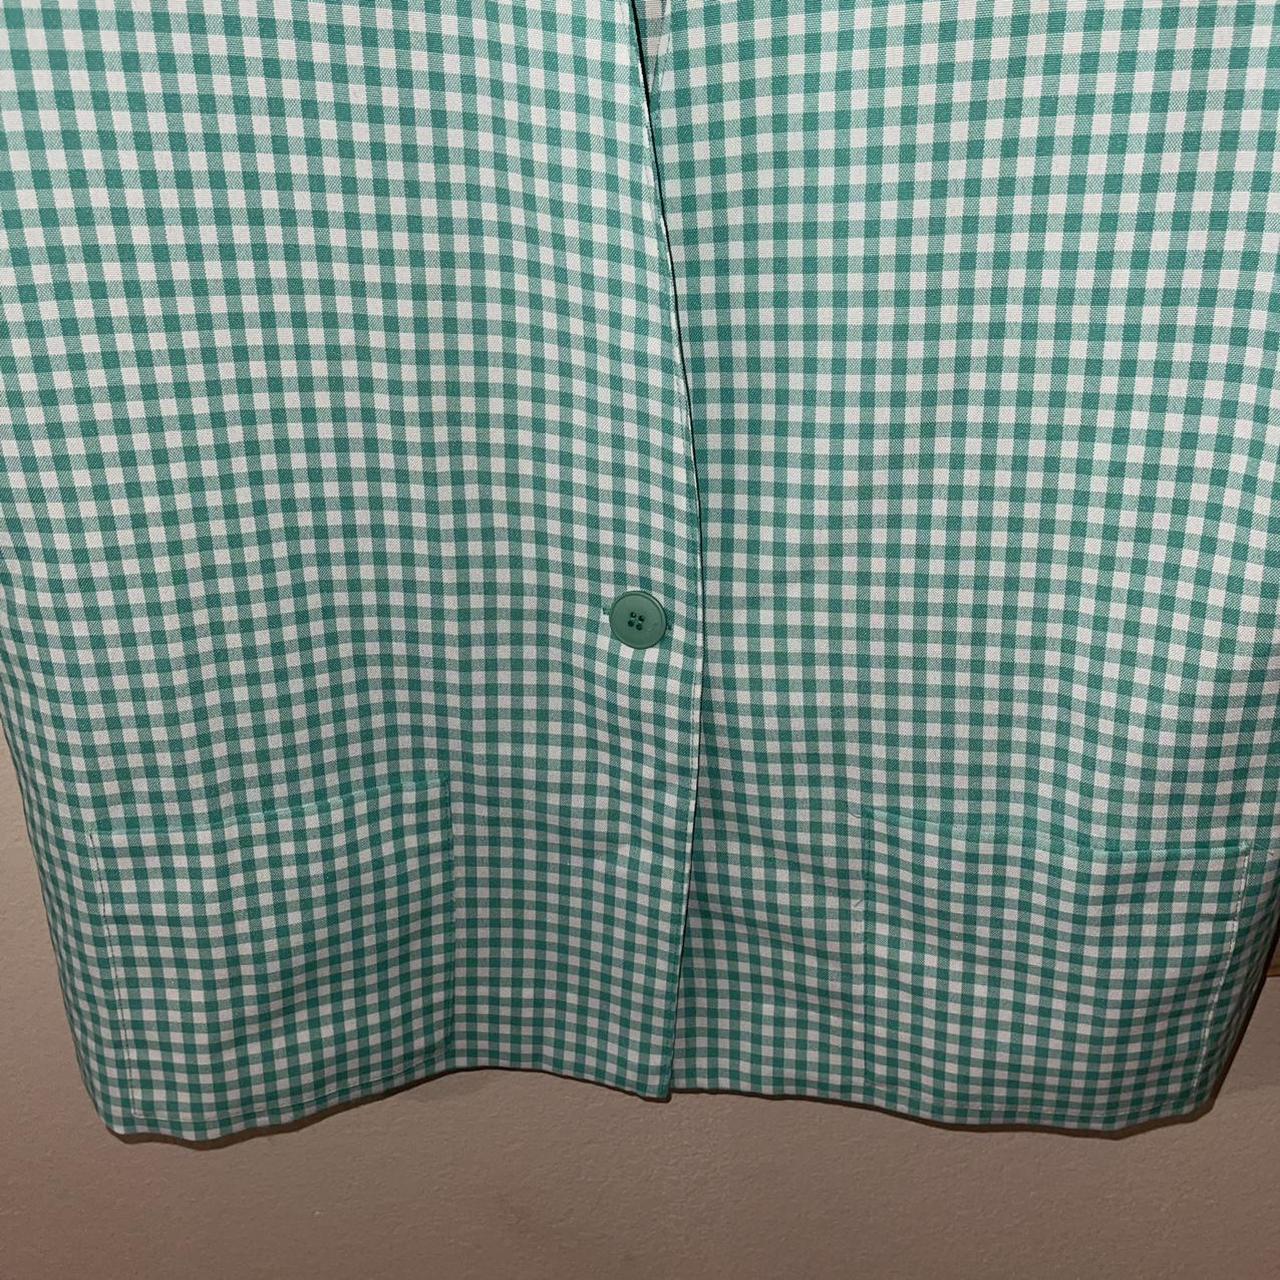 Product Image 3 - Green and white checkered vintage